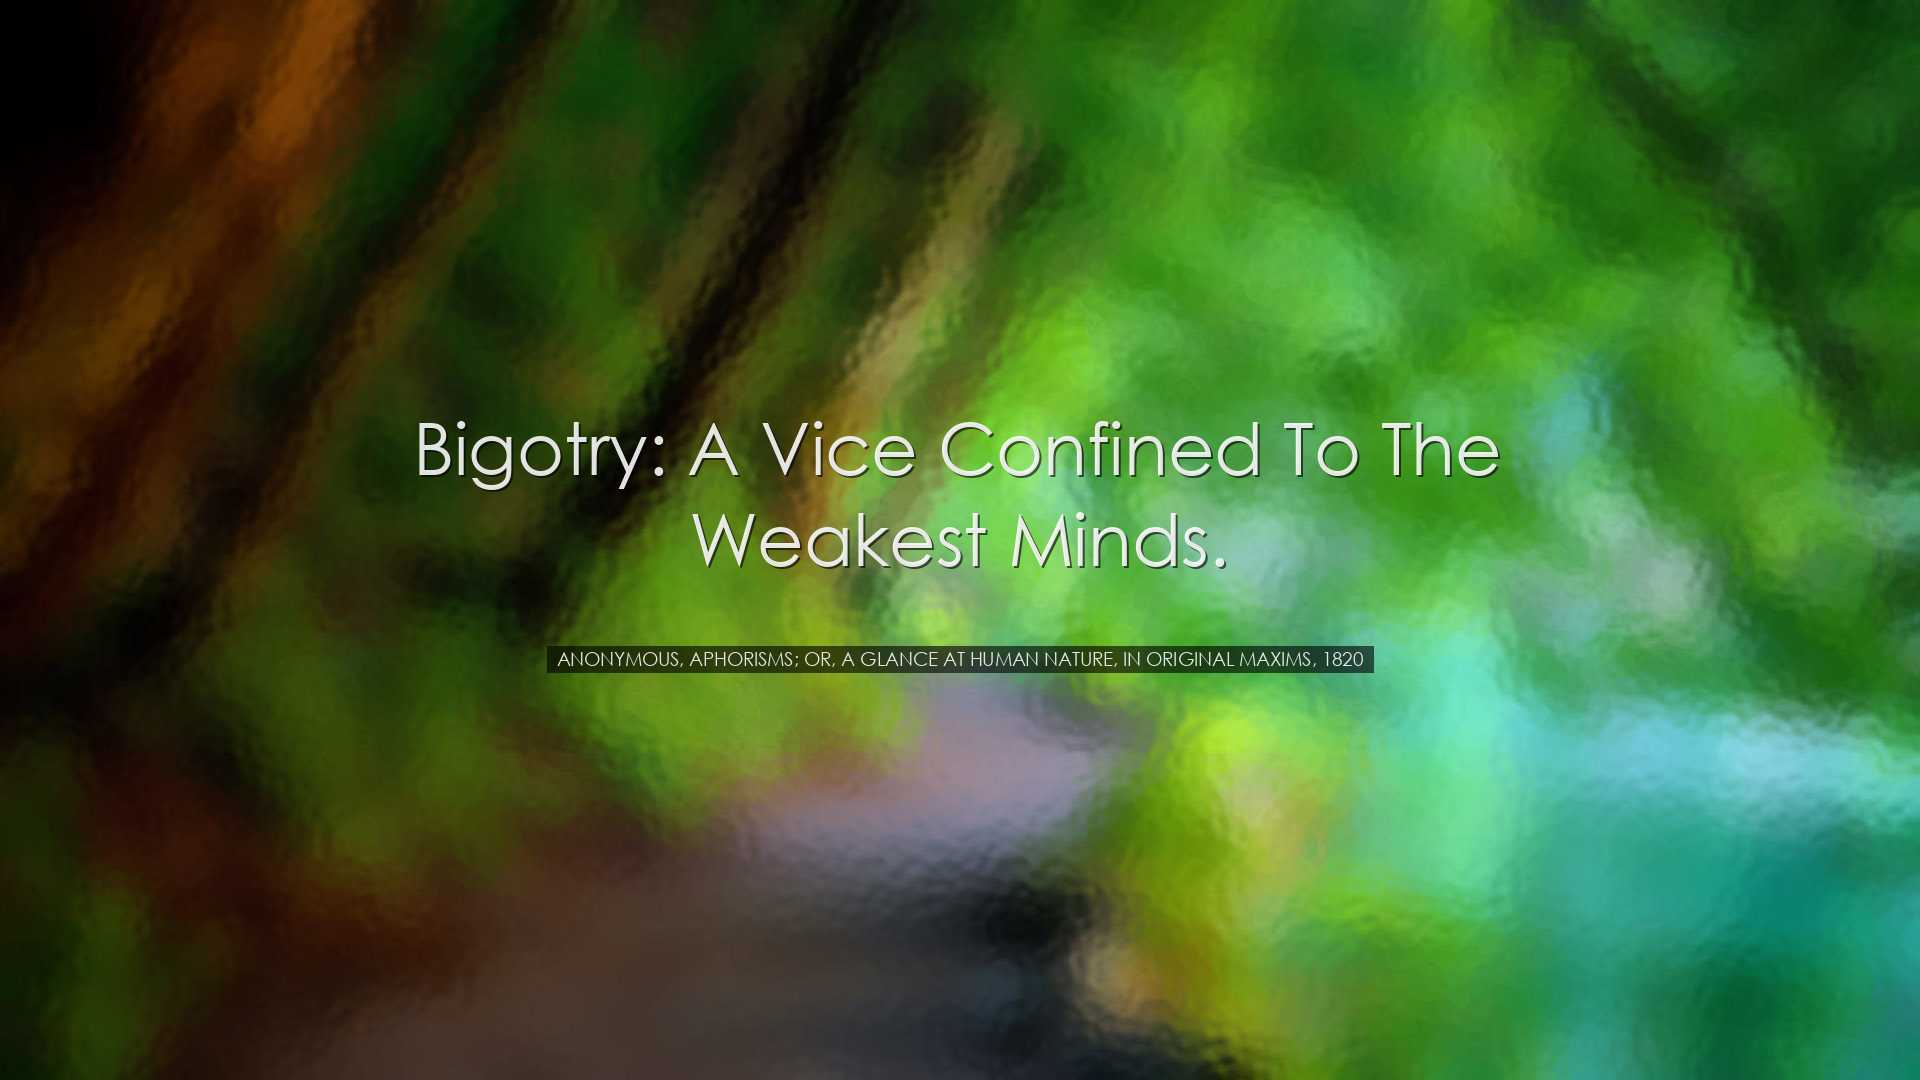 Bigotry: A vice confined to the weakest minds. - Anonymous, Aphori